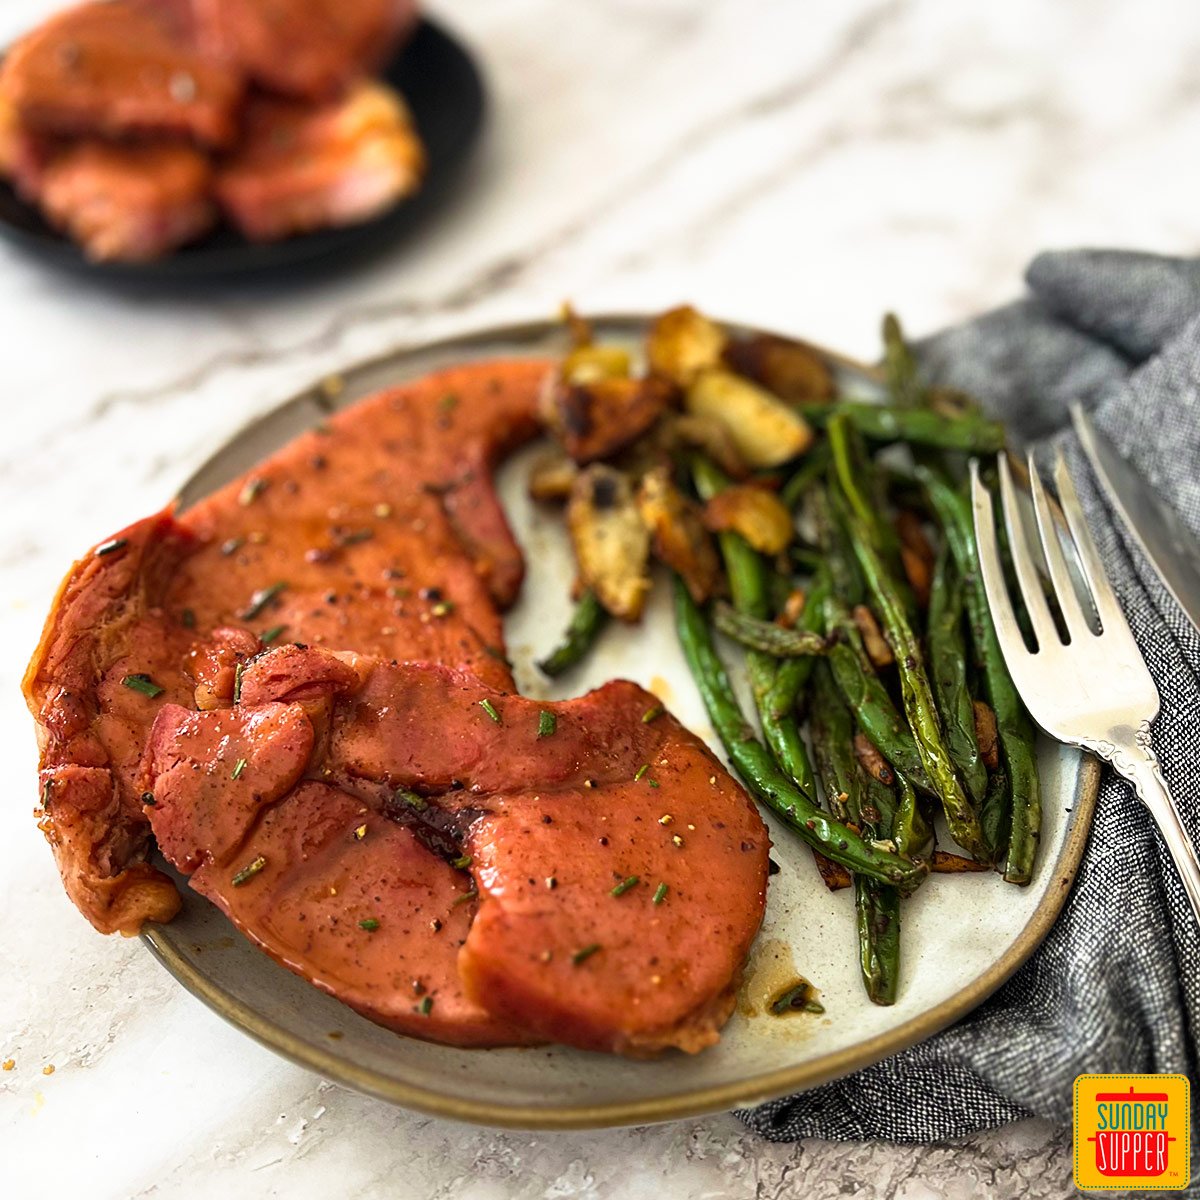 a plate of ham steak, green beans and roasted potatoes with a fork and cloth